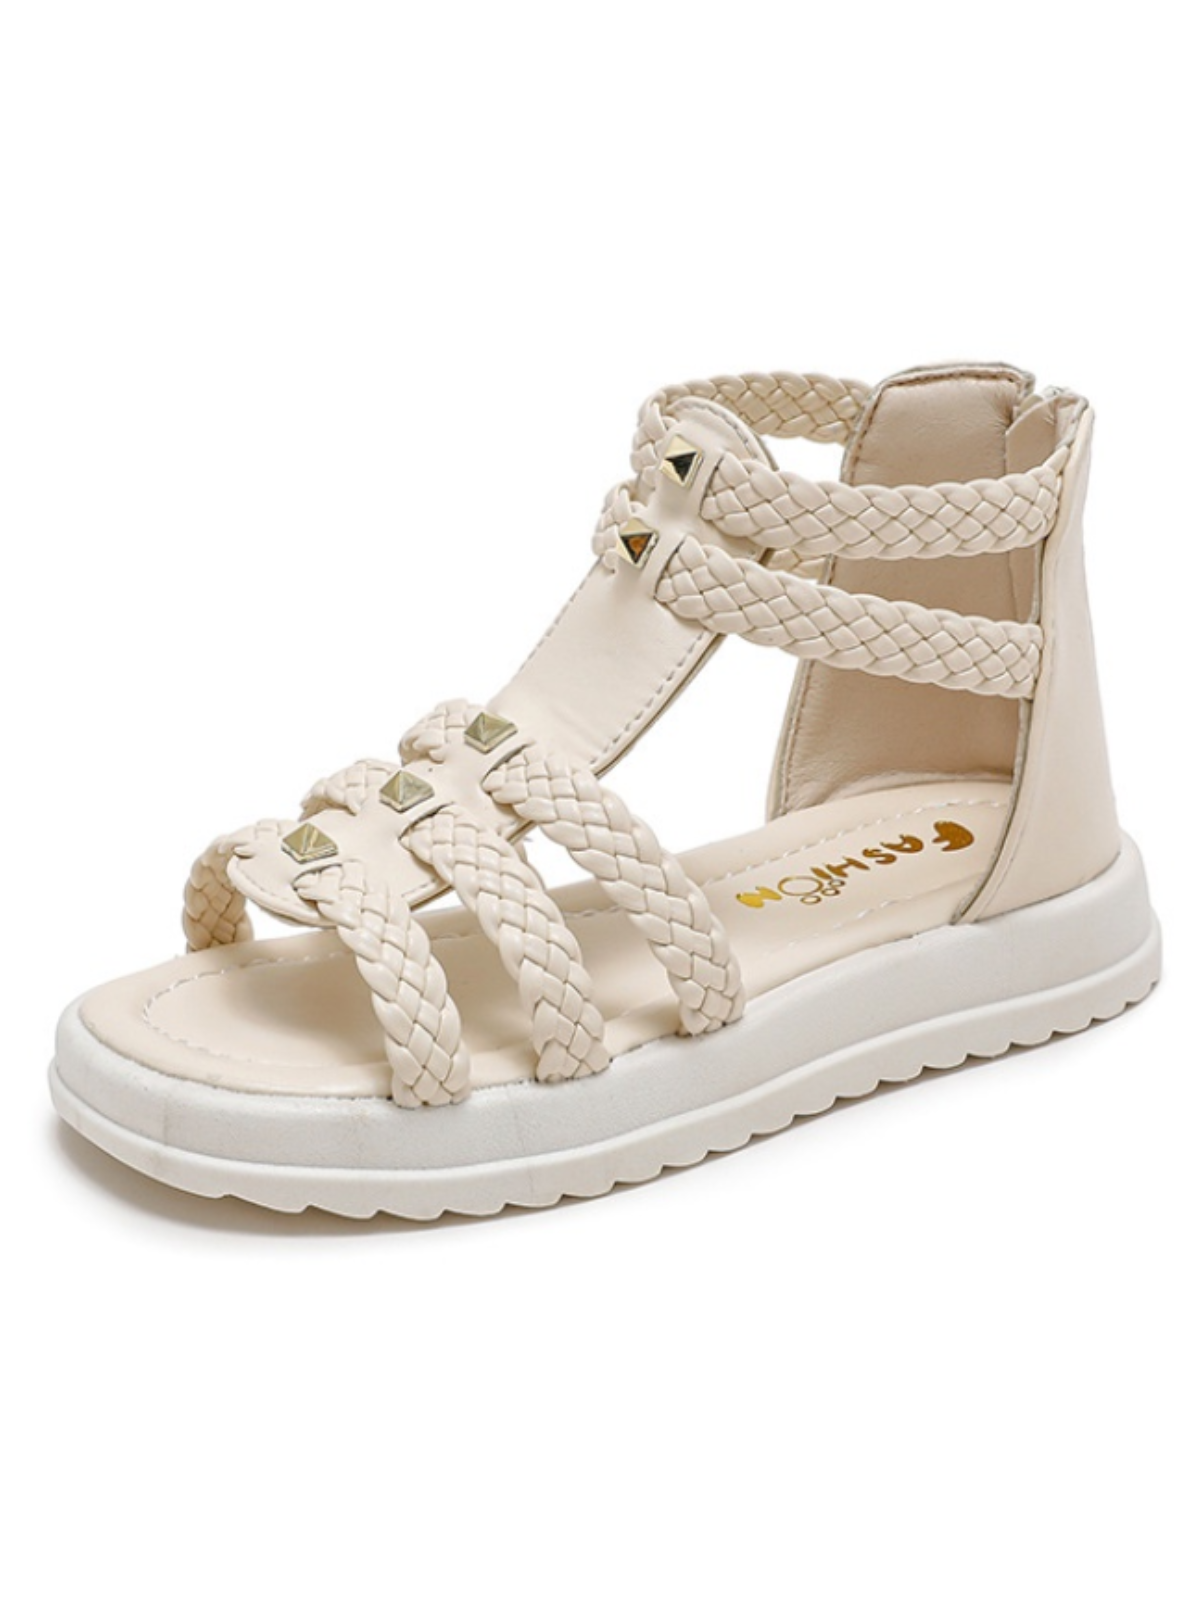 Little Fashion Diva Strappy Gladiator Sandals by Liv and Mia